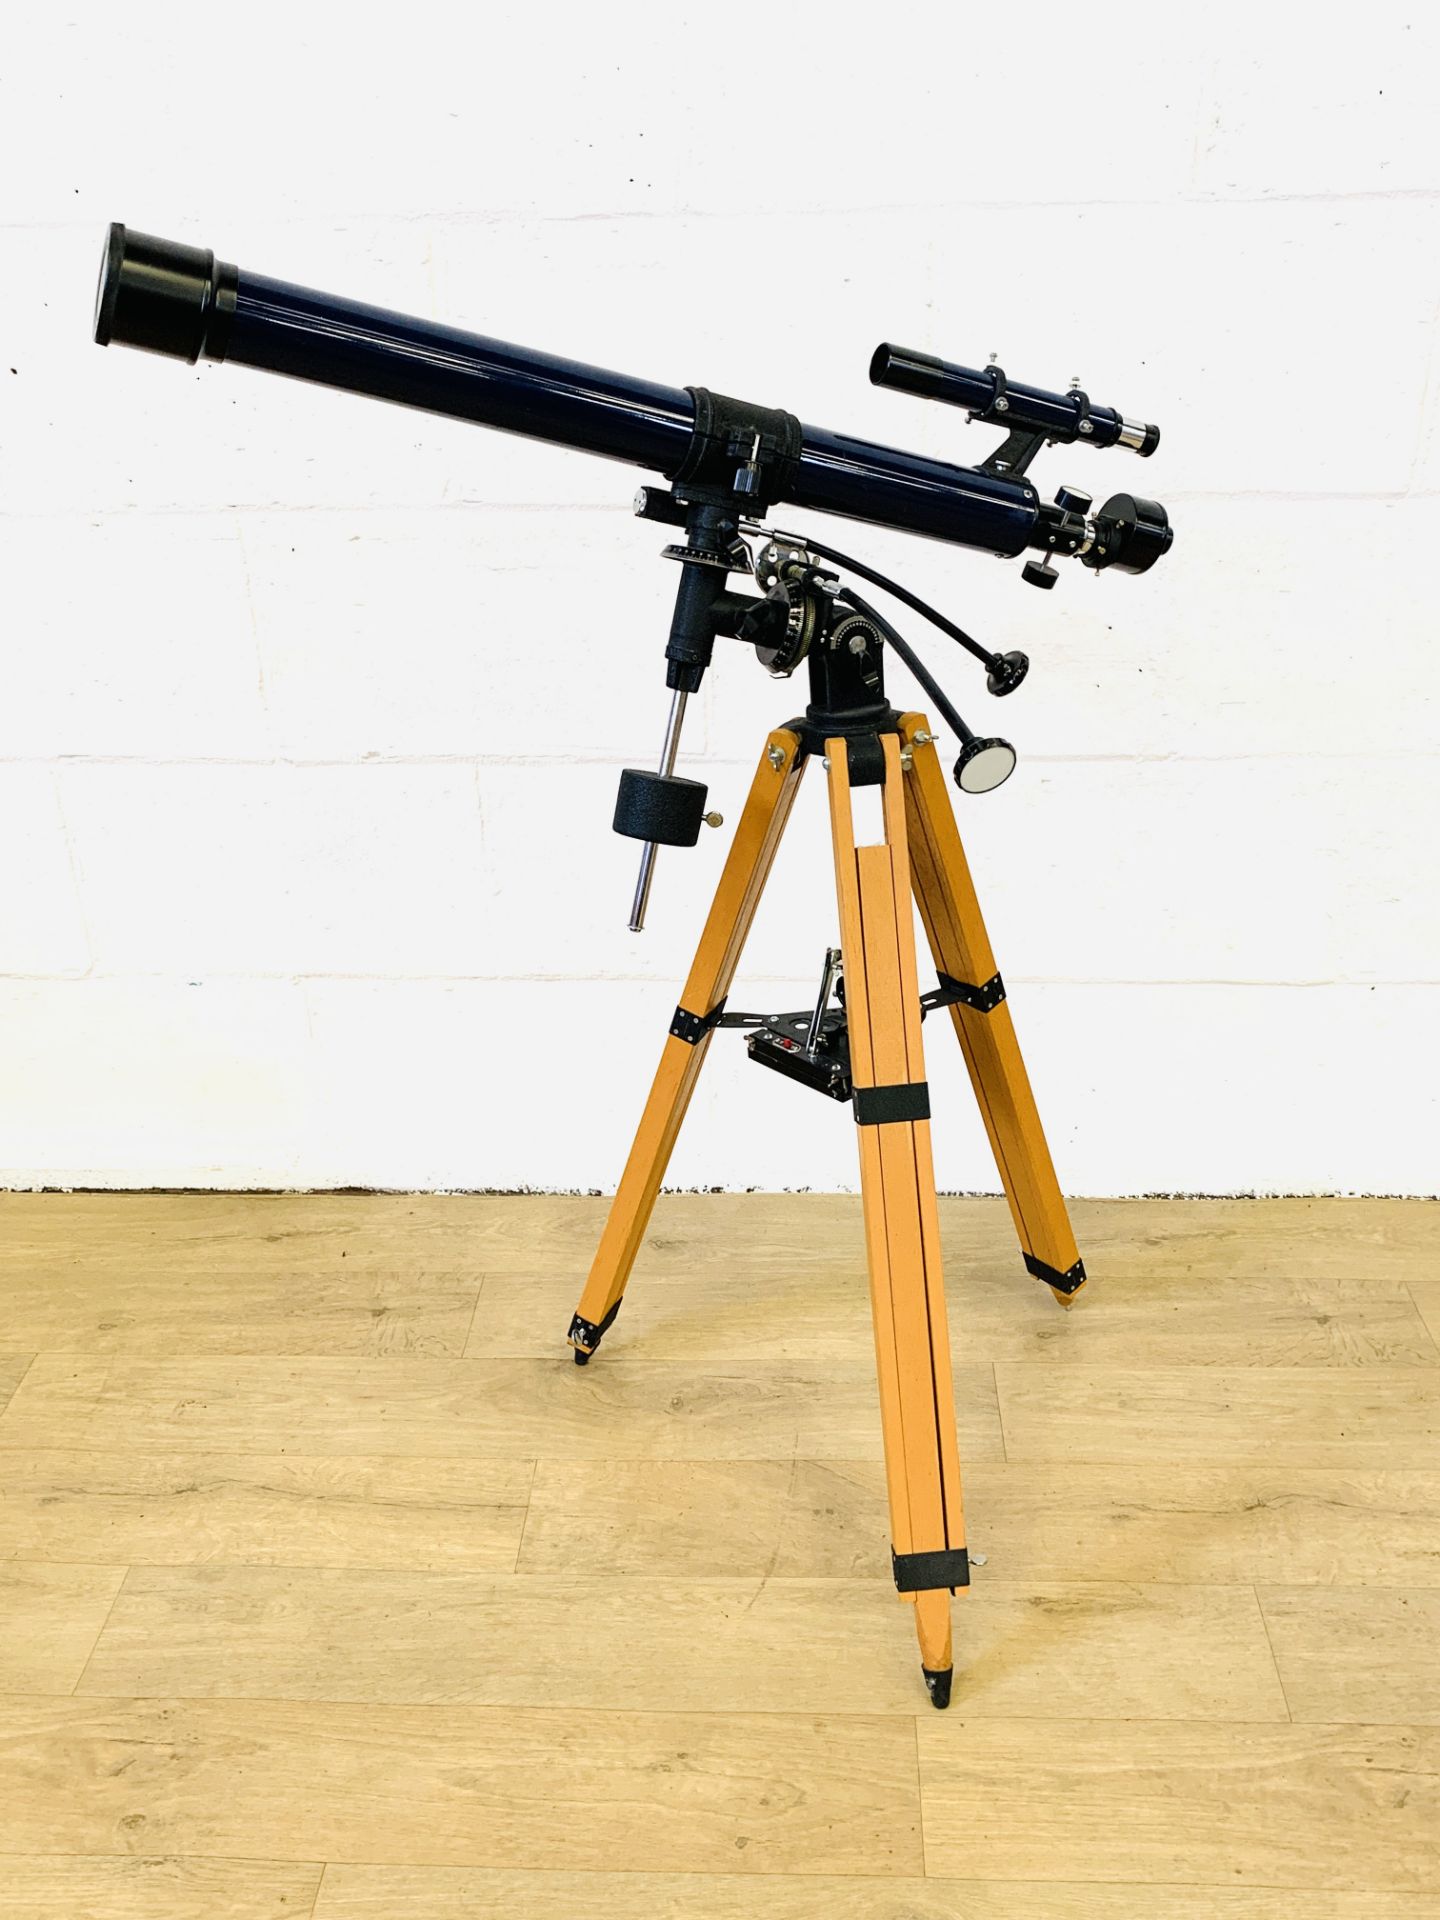 Astral 500 telescope - Image 6 of 6